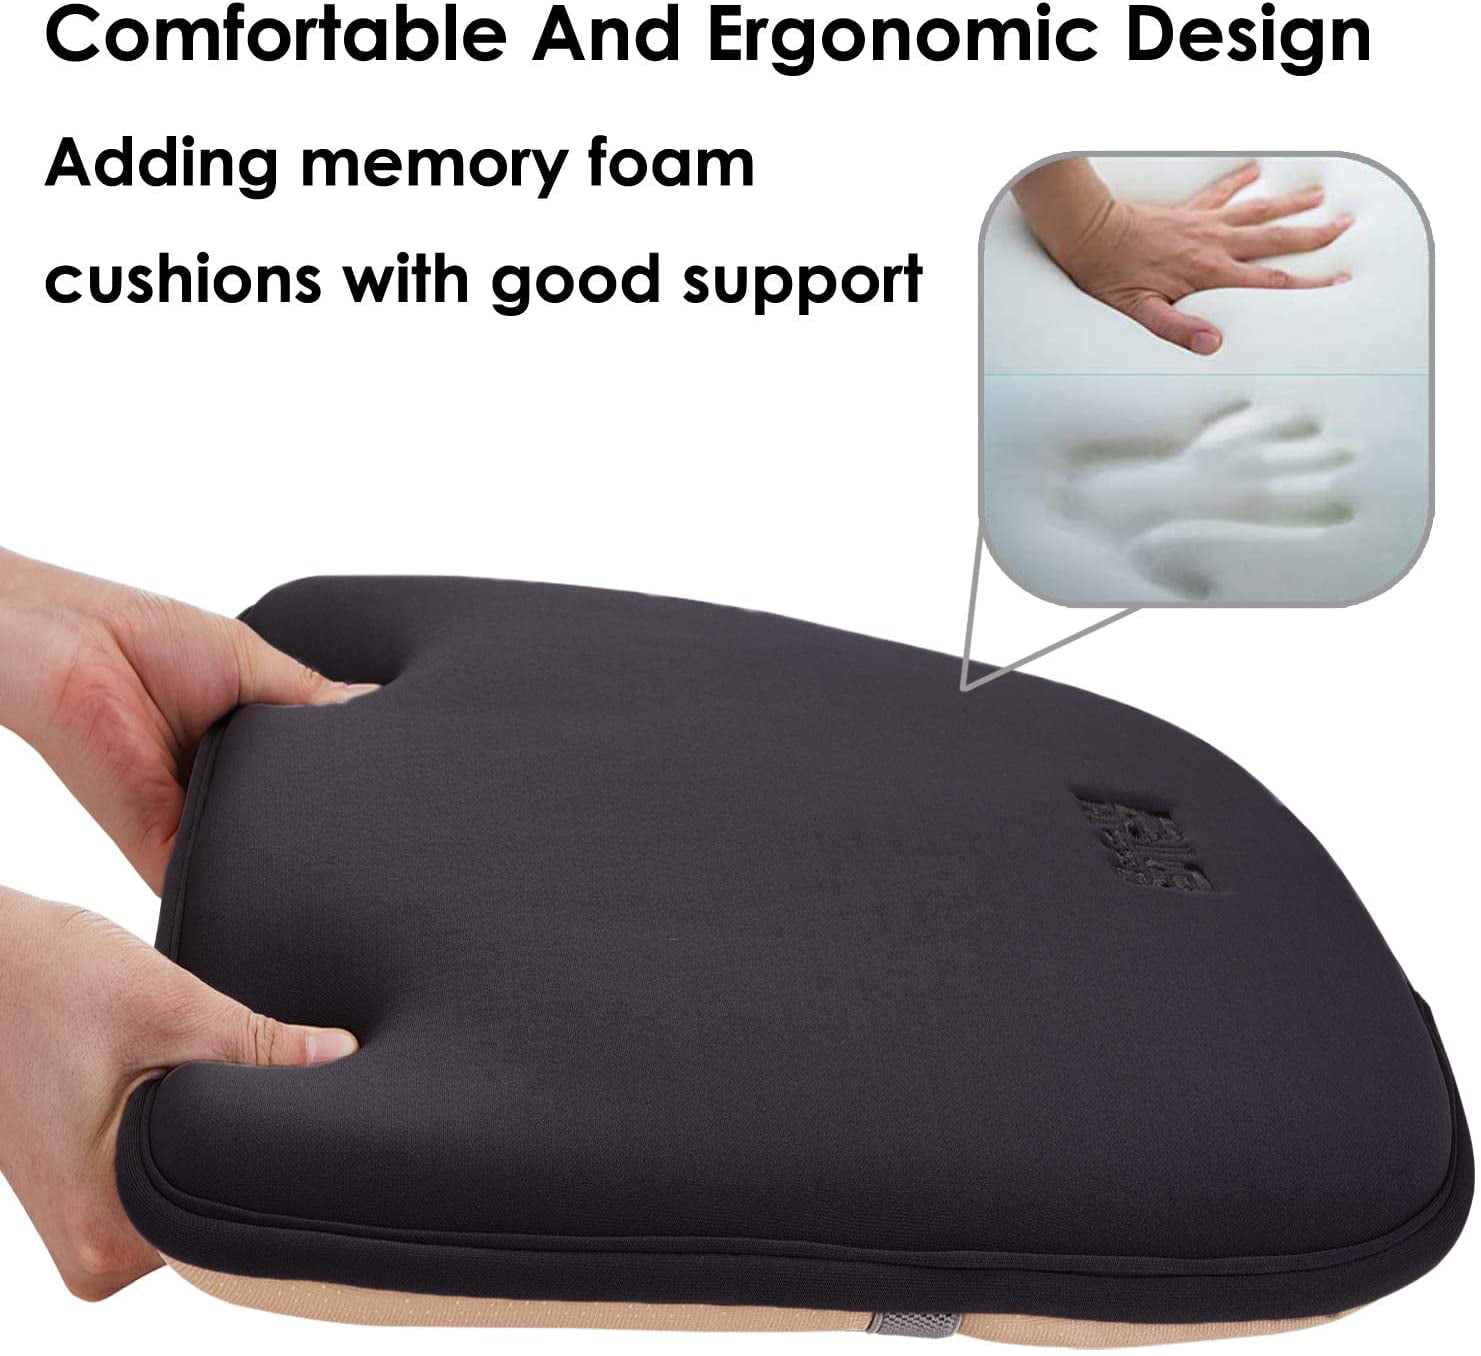 Black Big Hippo Seat Cushion Memory Foam Seat Pads for Chairs Padded Cushion Chair Seat Pads with Elastic Bands Non-Slip Seat Pad Cushions for Home Kitchen Garden Office Car 